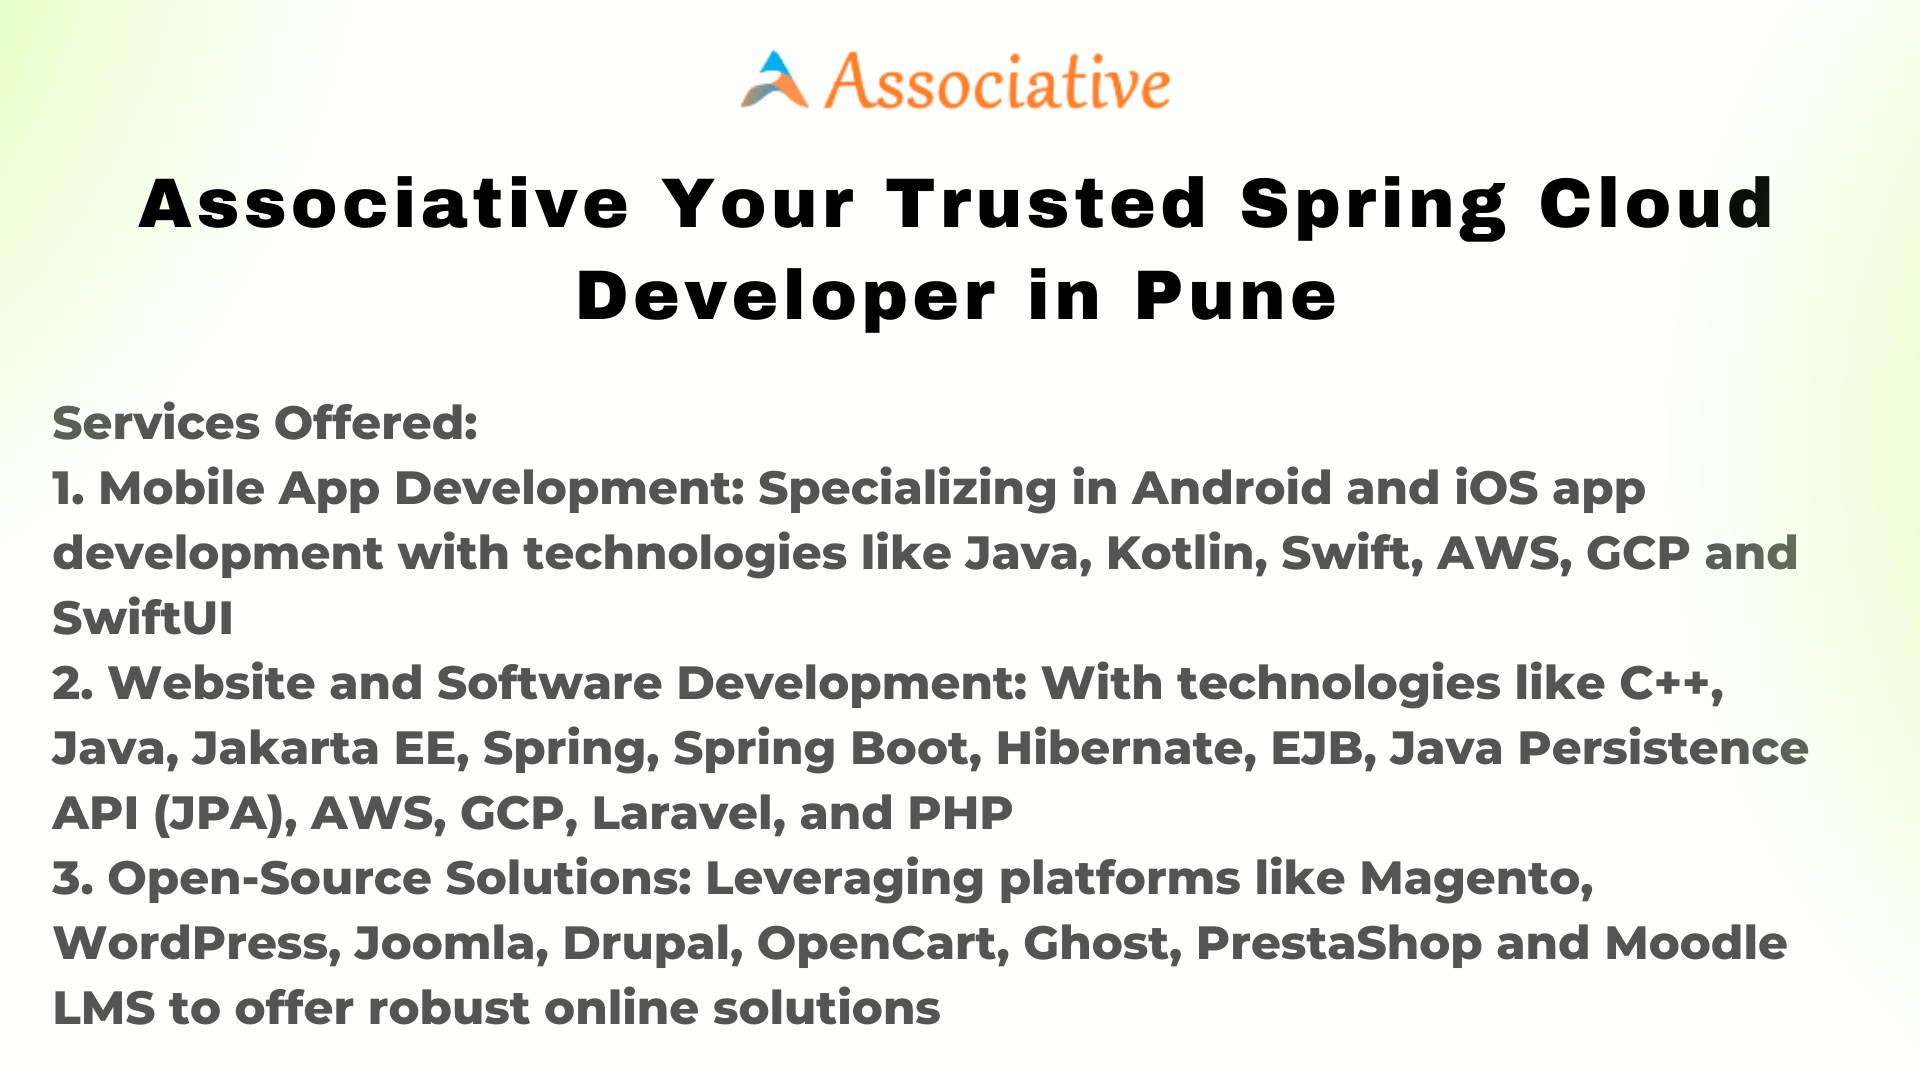 Associative Your Trusted Spring Cloud Developer in Pune